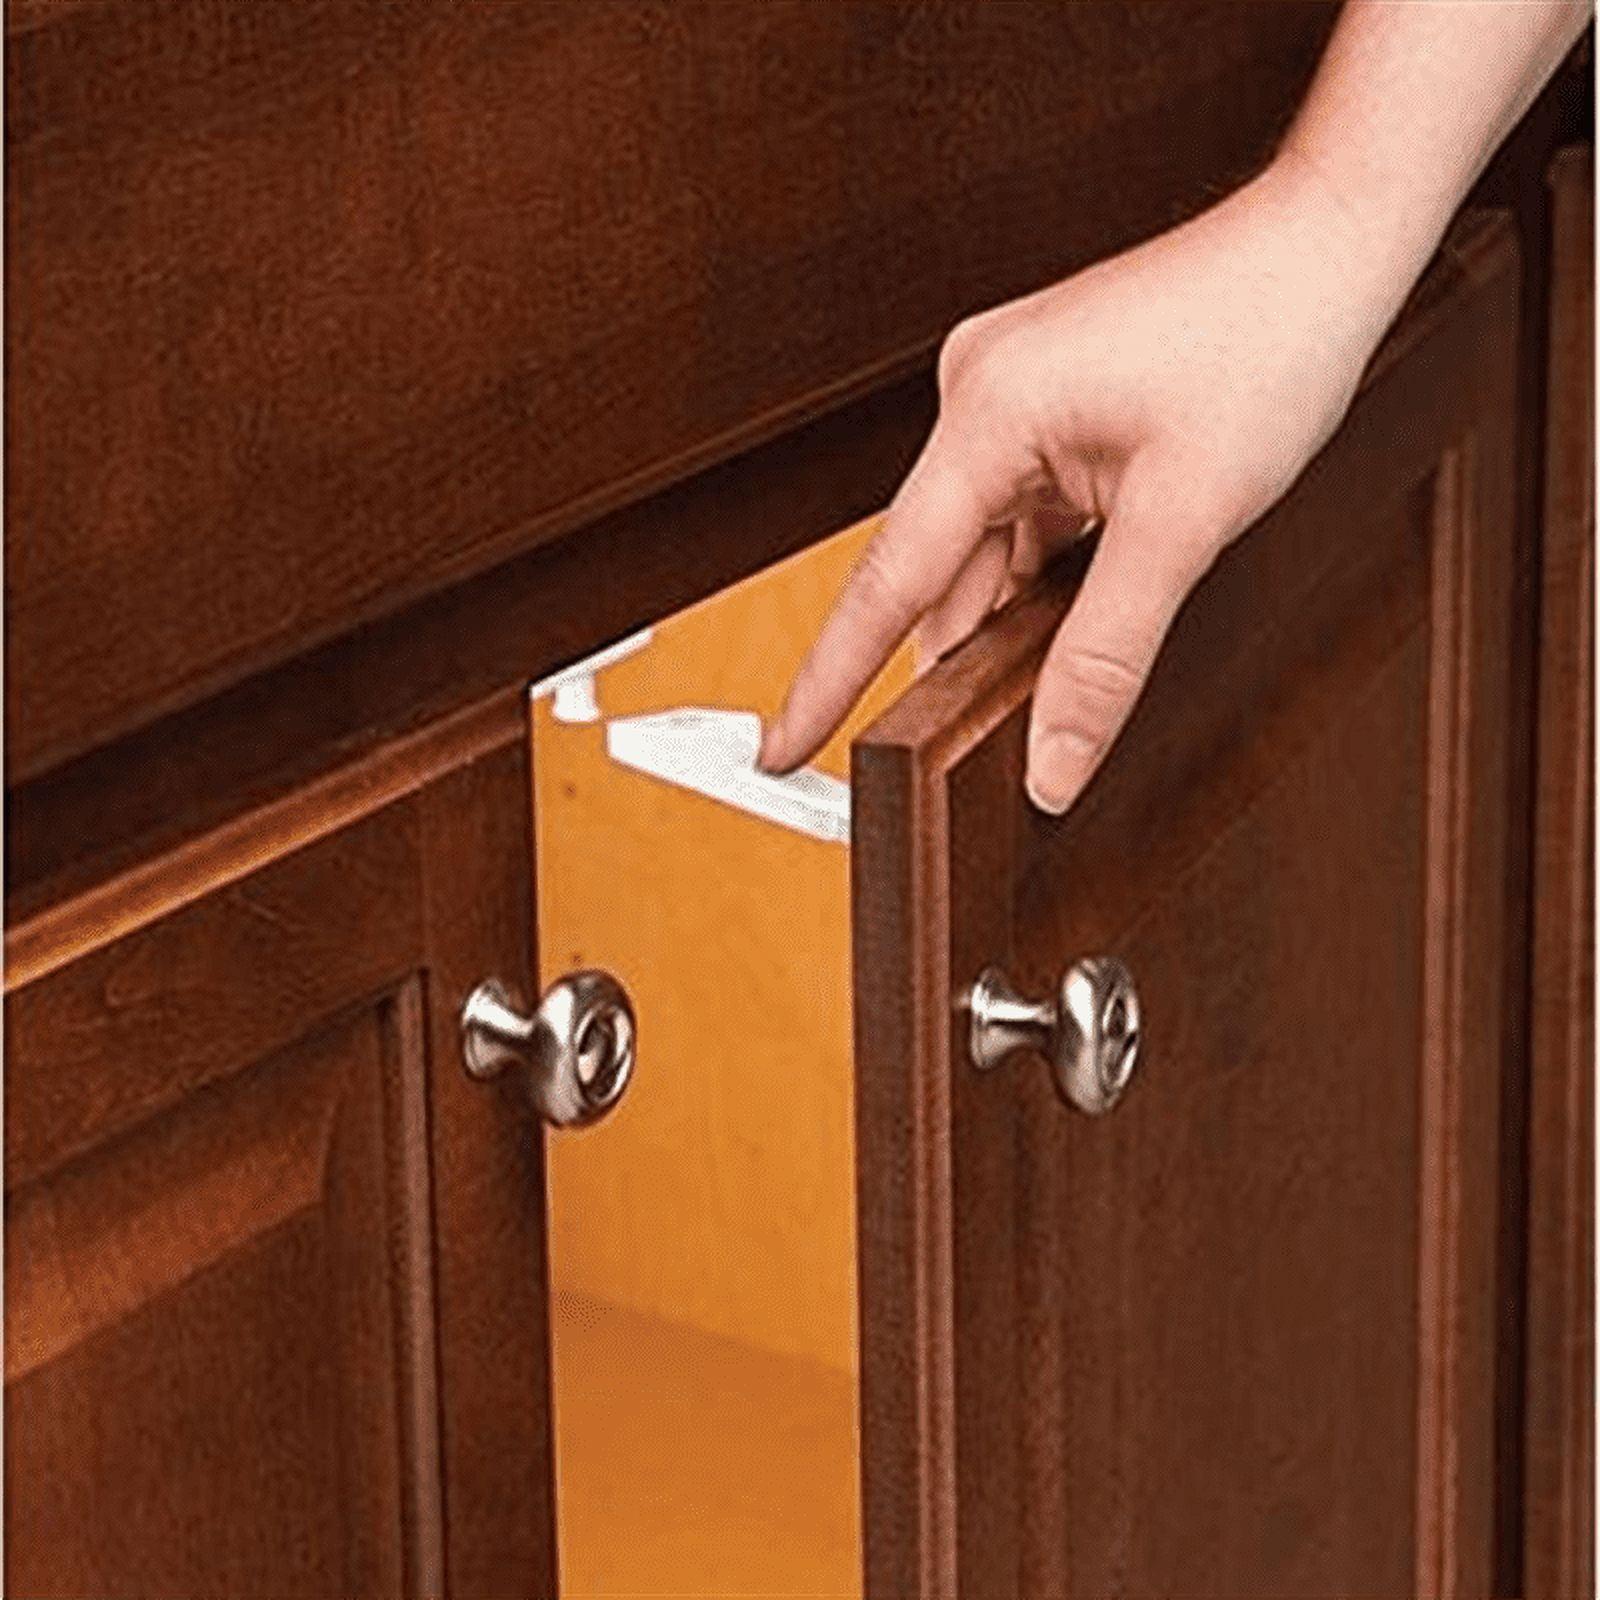 Baby Proof Cabinet Latches (2 Pack) Childproof Drawer Latches with